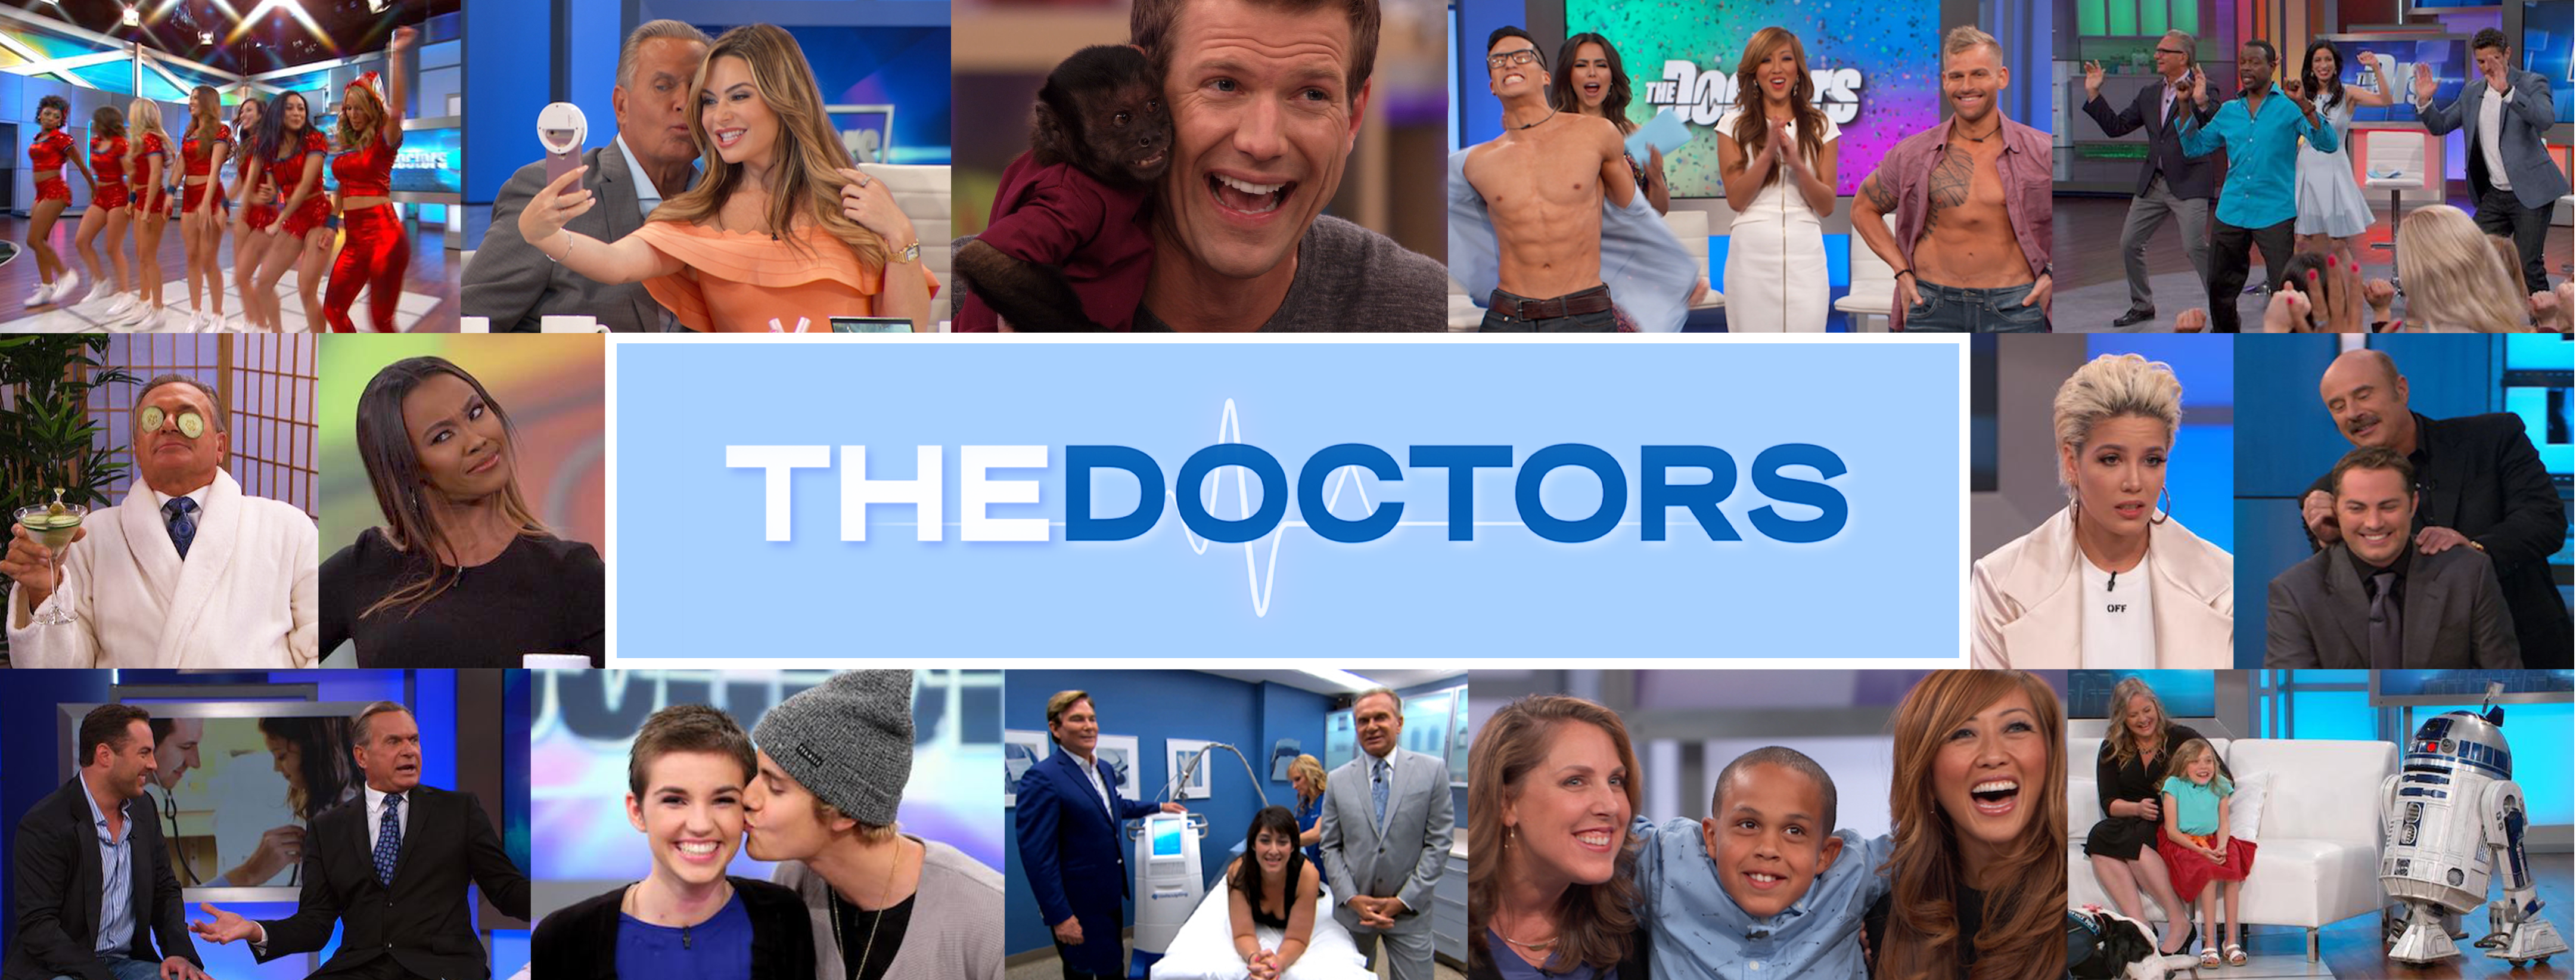 Woman Seeks Help For Deflated Breast Implant The Doctors Tv Show